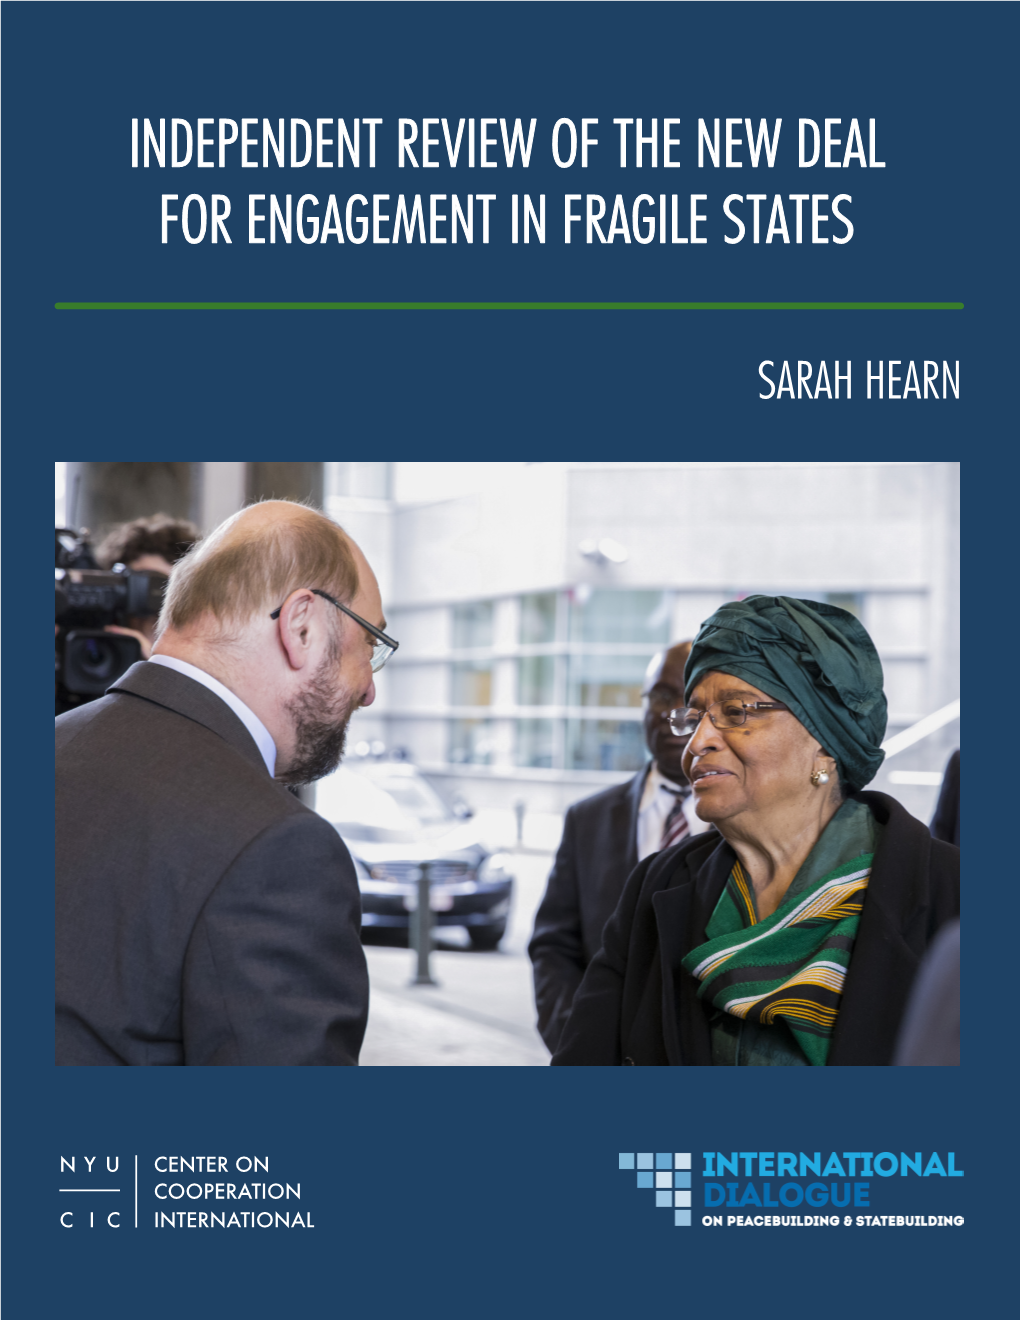 Independent Review of the New Deal for Engagement in Fragile States